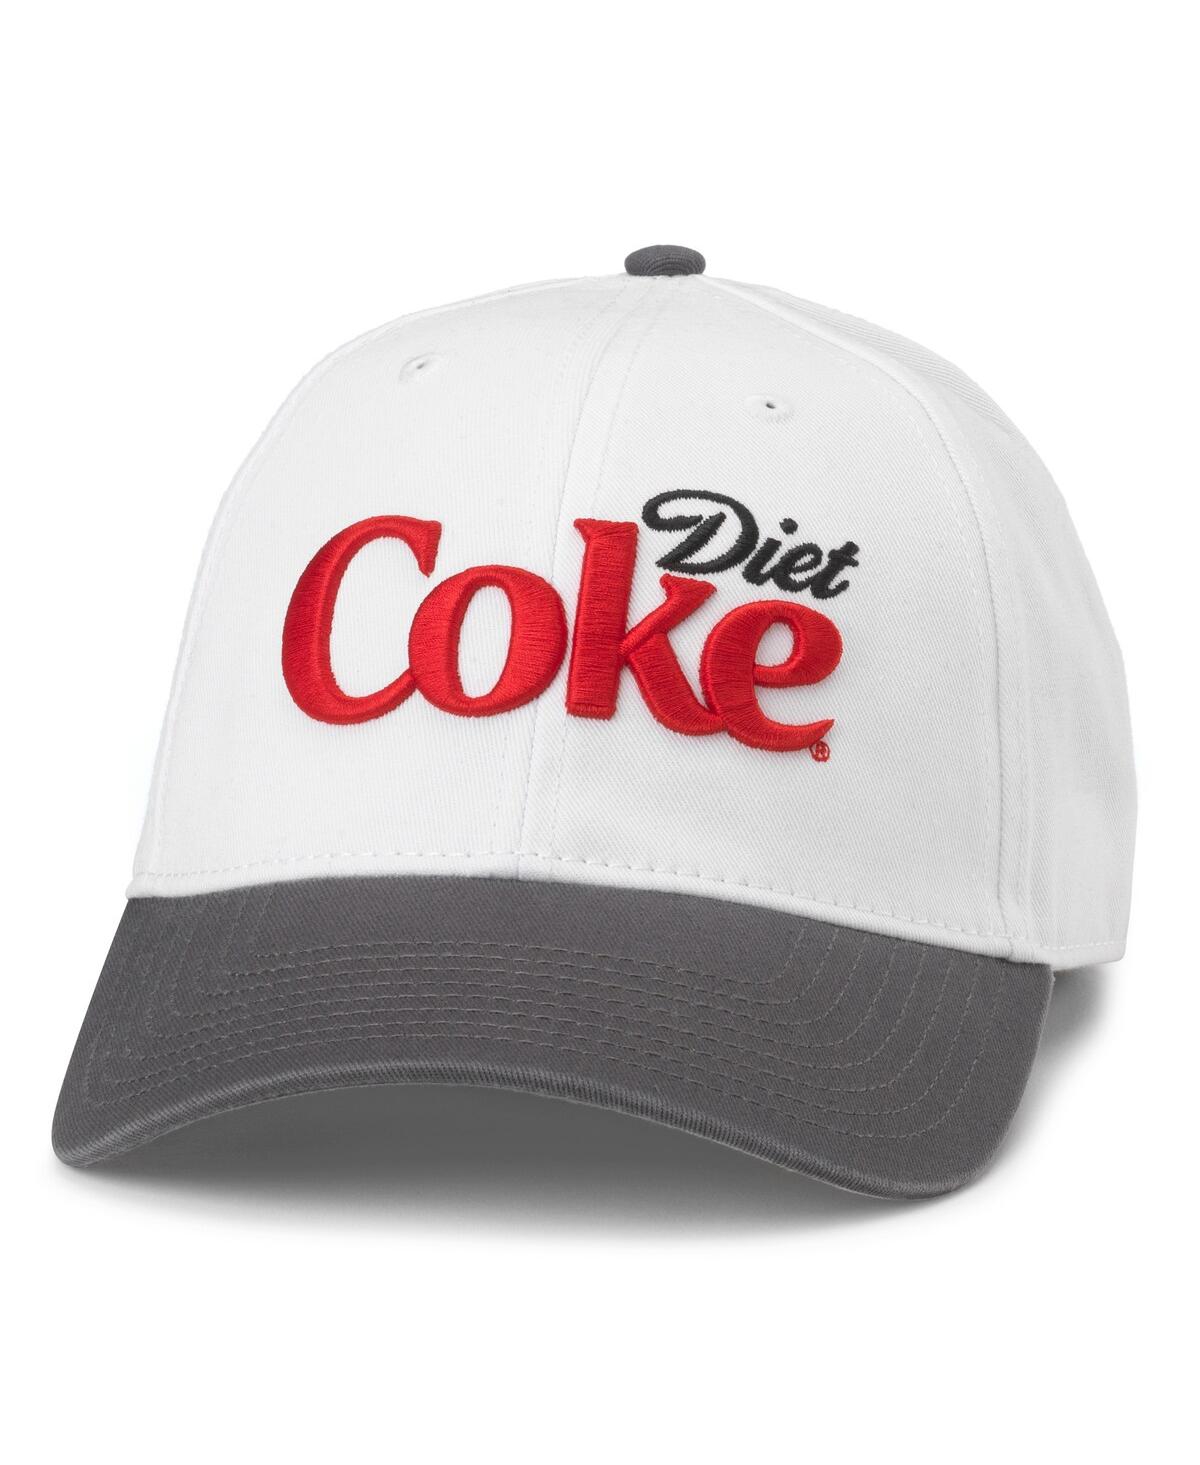 American Needle Men's And Women's  White, Charcoal Diet Coke Ballpark Adjustable Hat In White,charcoal